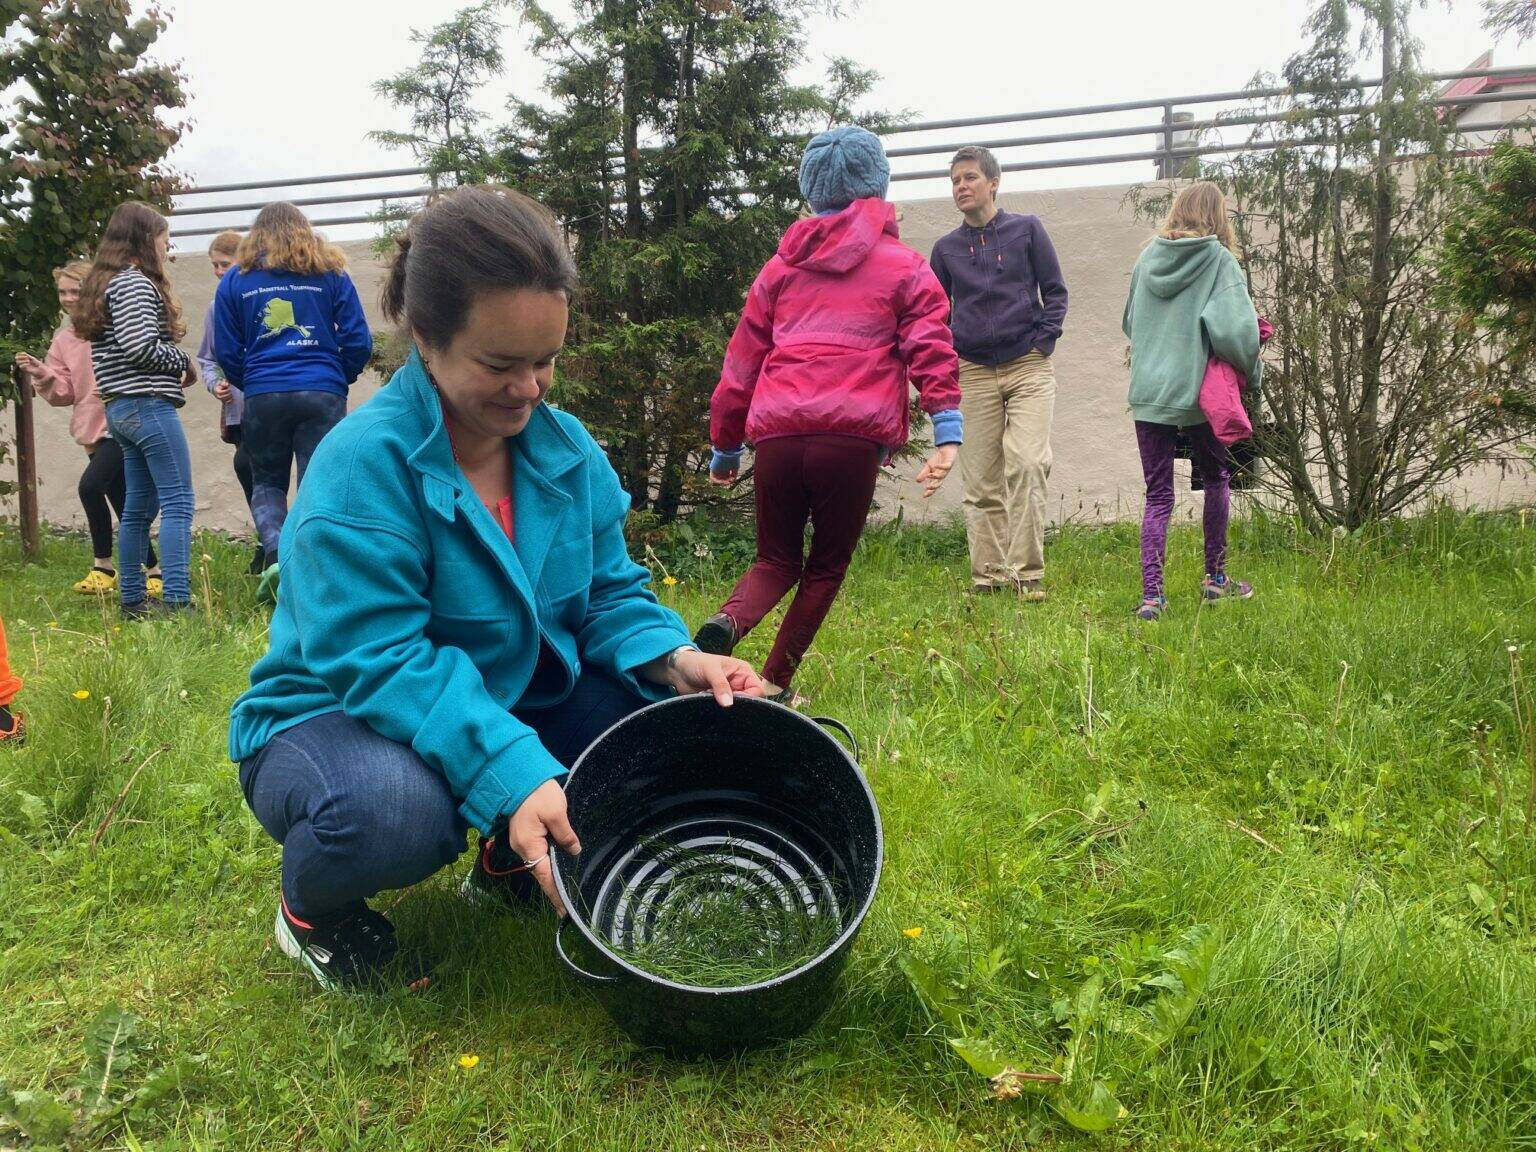 Weaver and textile artist Lily Hope shows a group of students how to forage for horsetails Saturday near the Alaska State Museum in Juneau. They boiled the plants to make a natural dye. (Photo by Claire Stremple/Alaska Beacon)